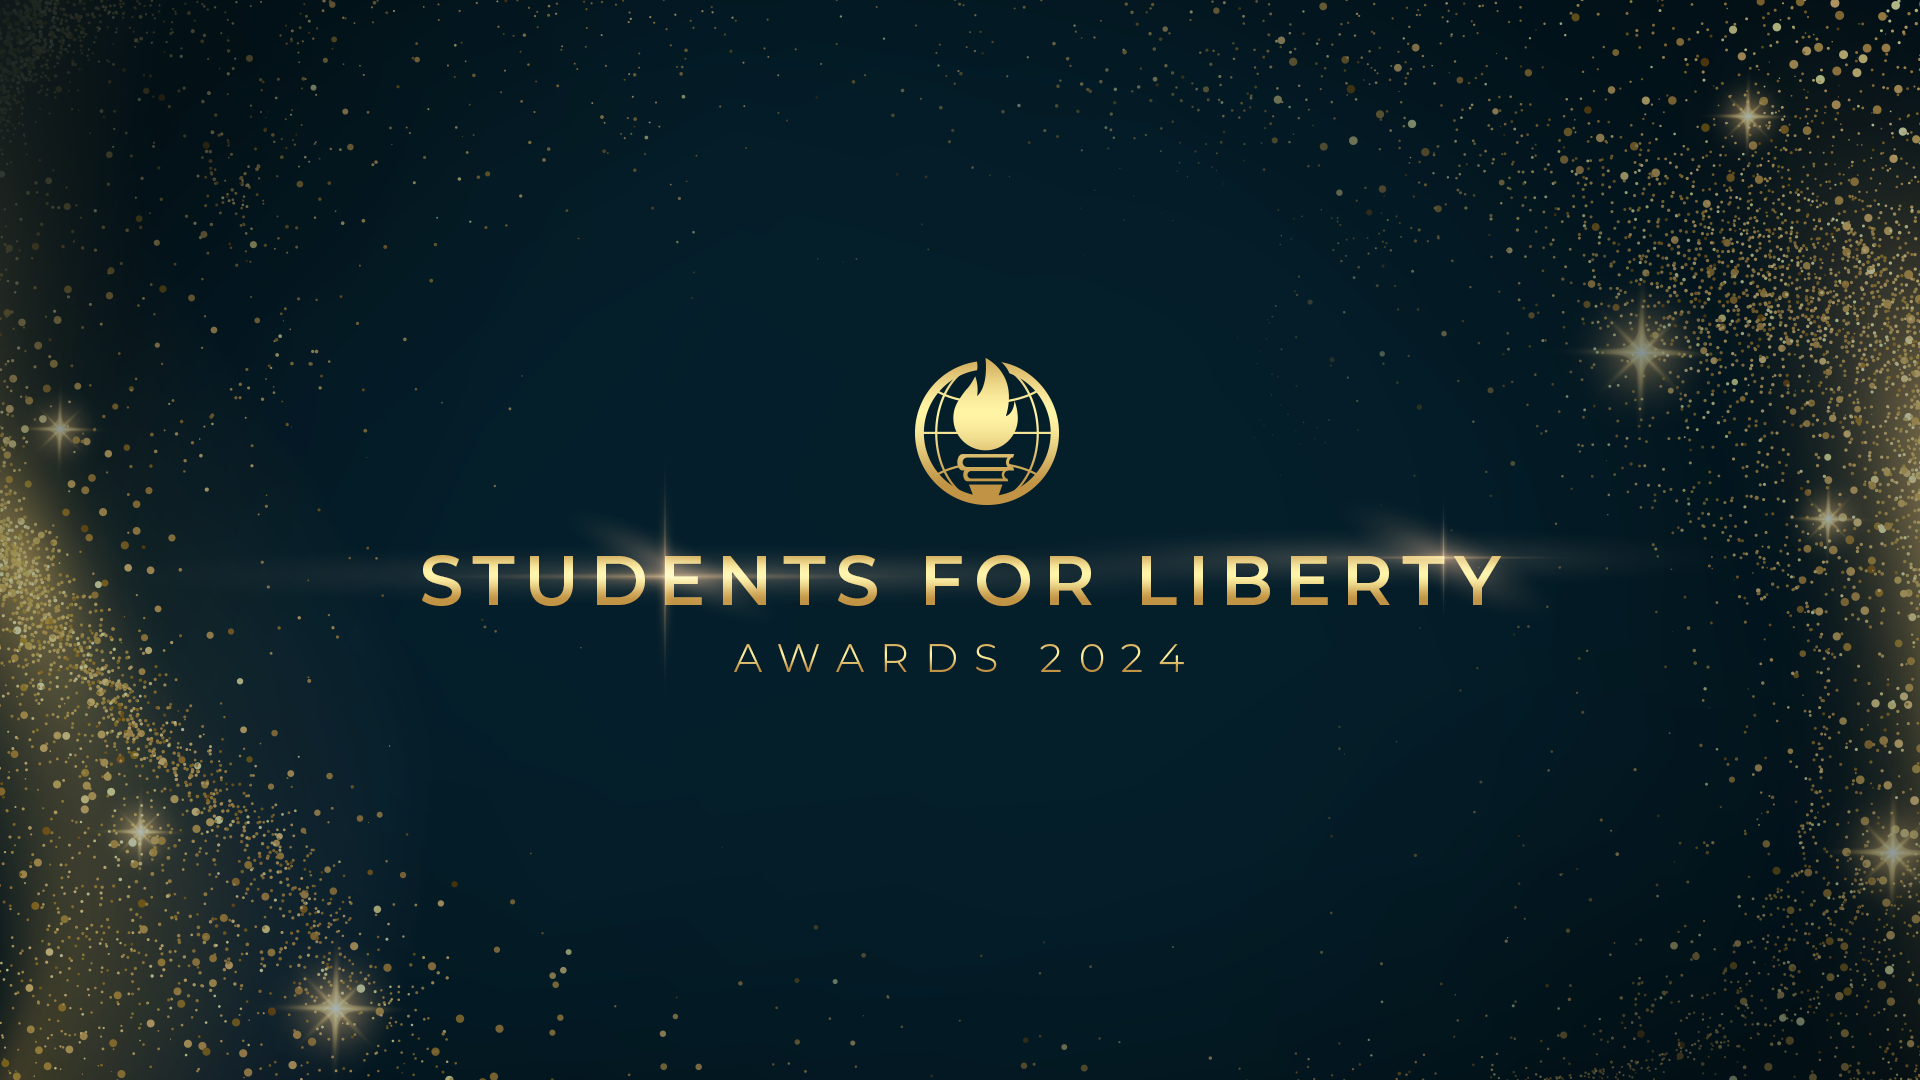 The moment we've all been waiting for is here! The nominations for Students For Liberty's prestigious Global Awards have officially been revealed!